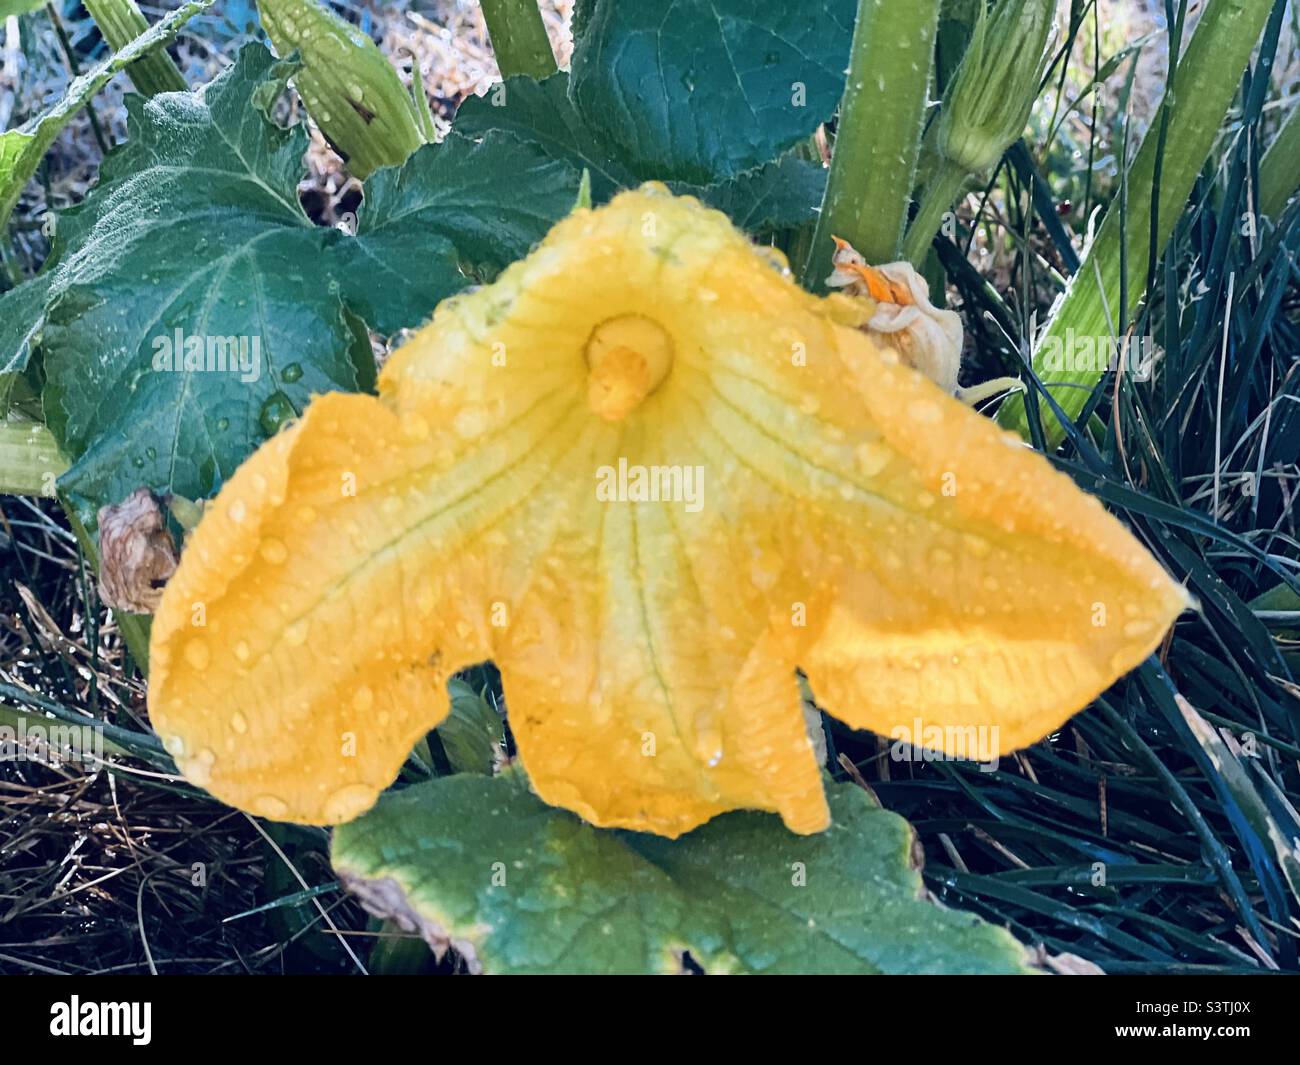 Yellow flower from the pumpkin patch and green leaves from the pumpkin vine Stock Photo